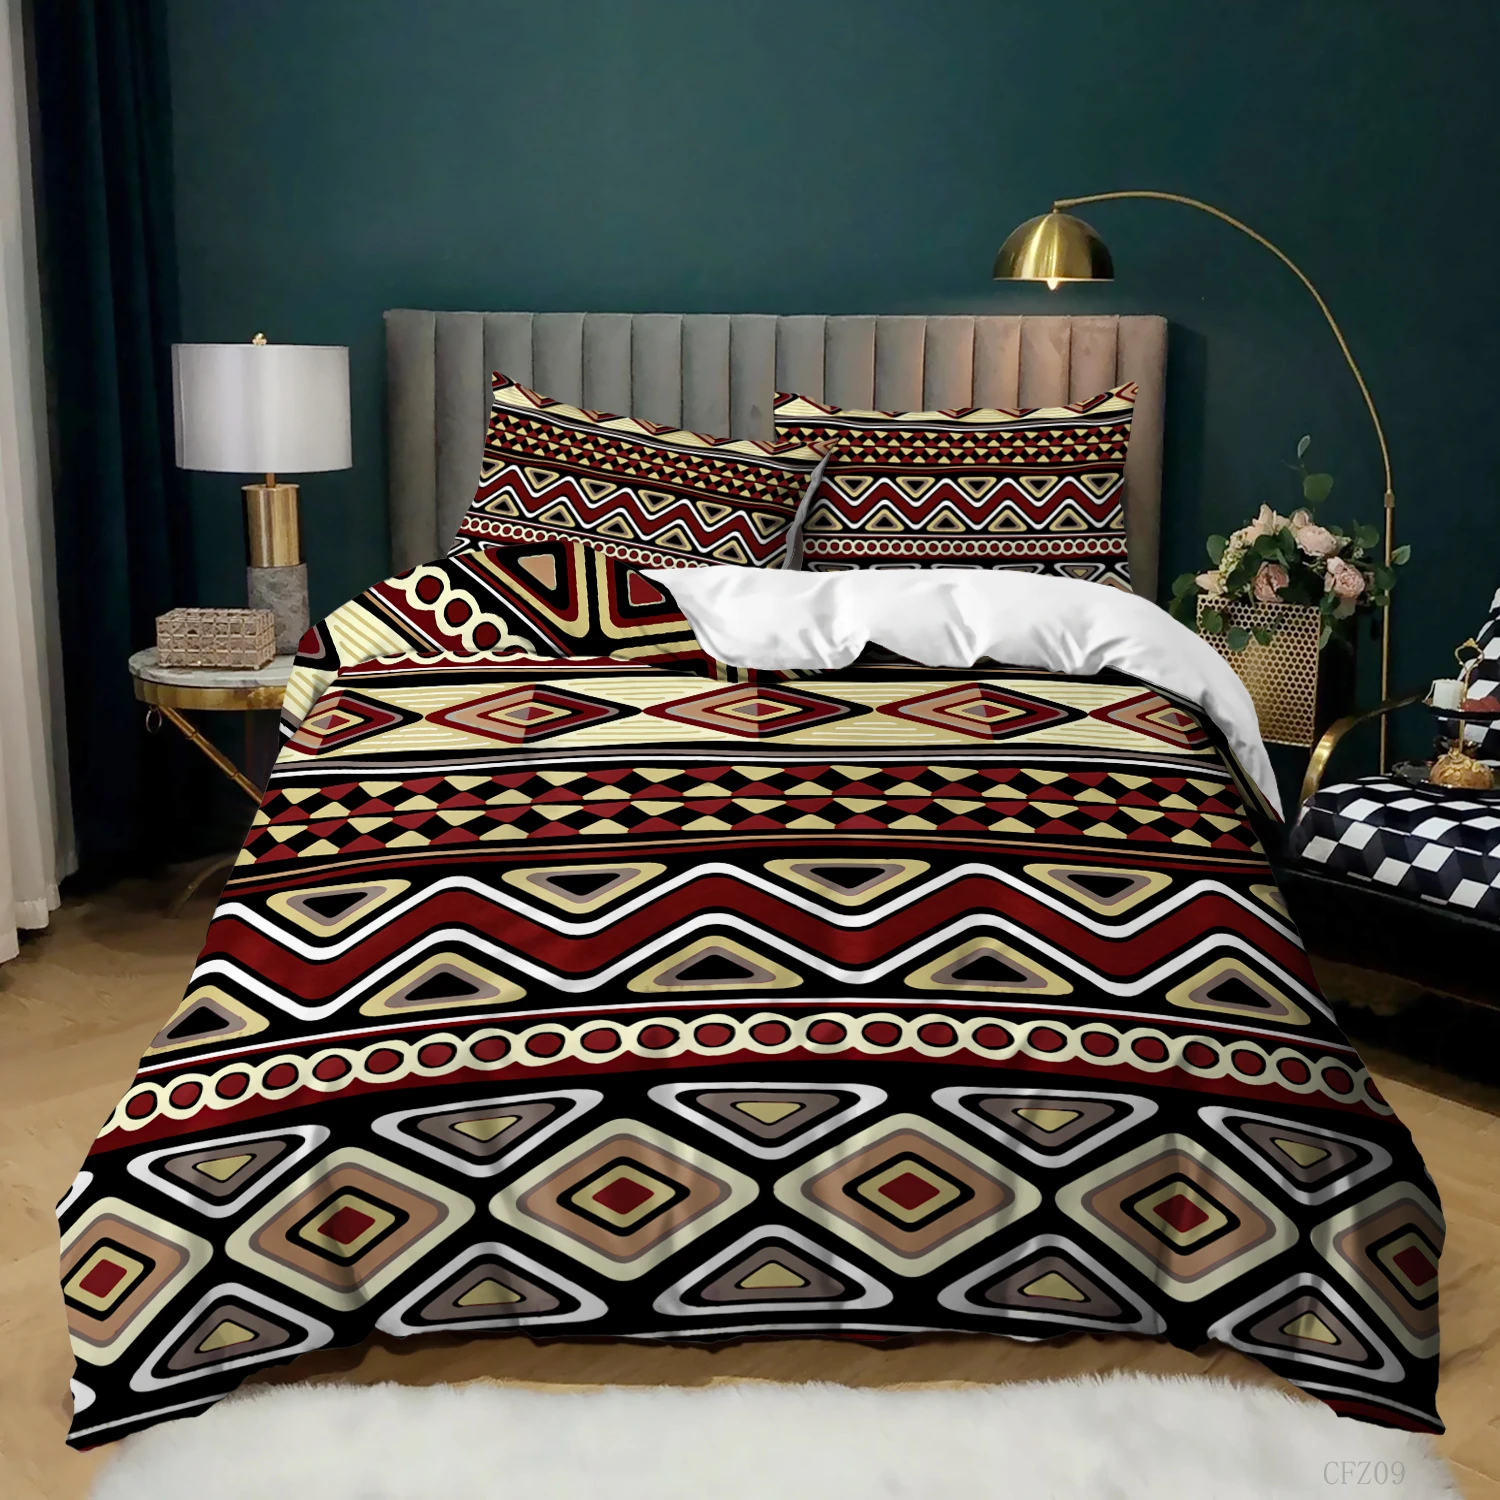 Striped Ethnic Bedding Style Comforter Cover Colourful Indian Tribal Bedding King Boho Duvet Cover| | - AliExpress